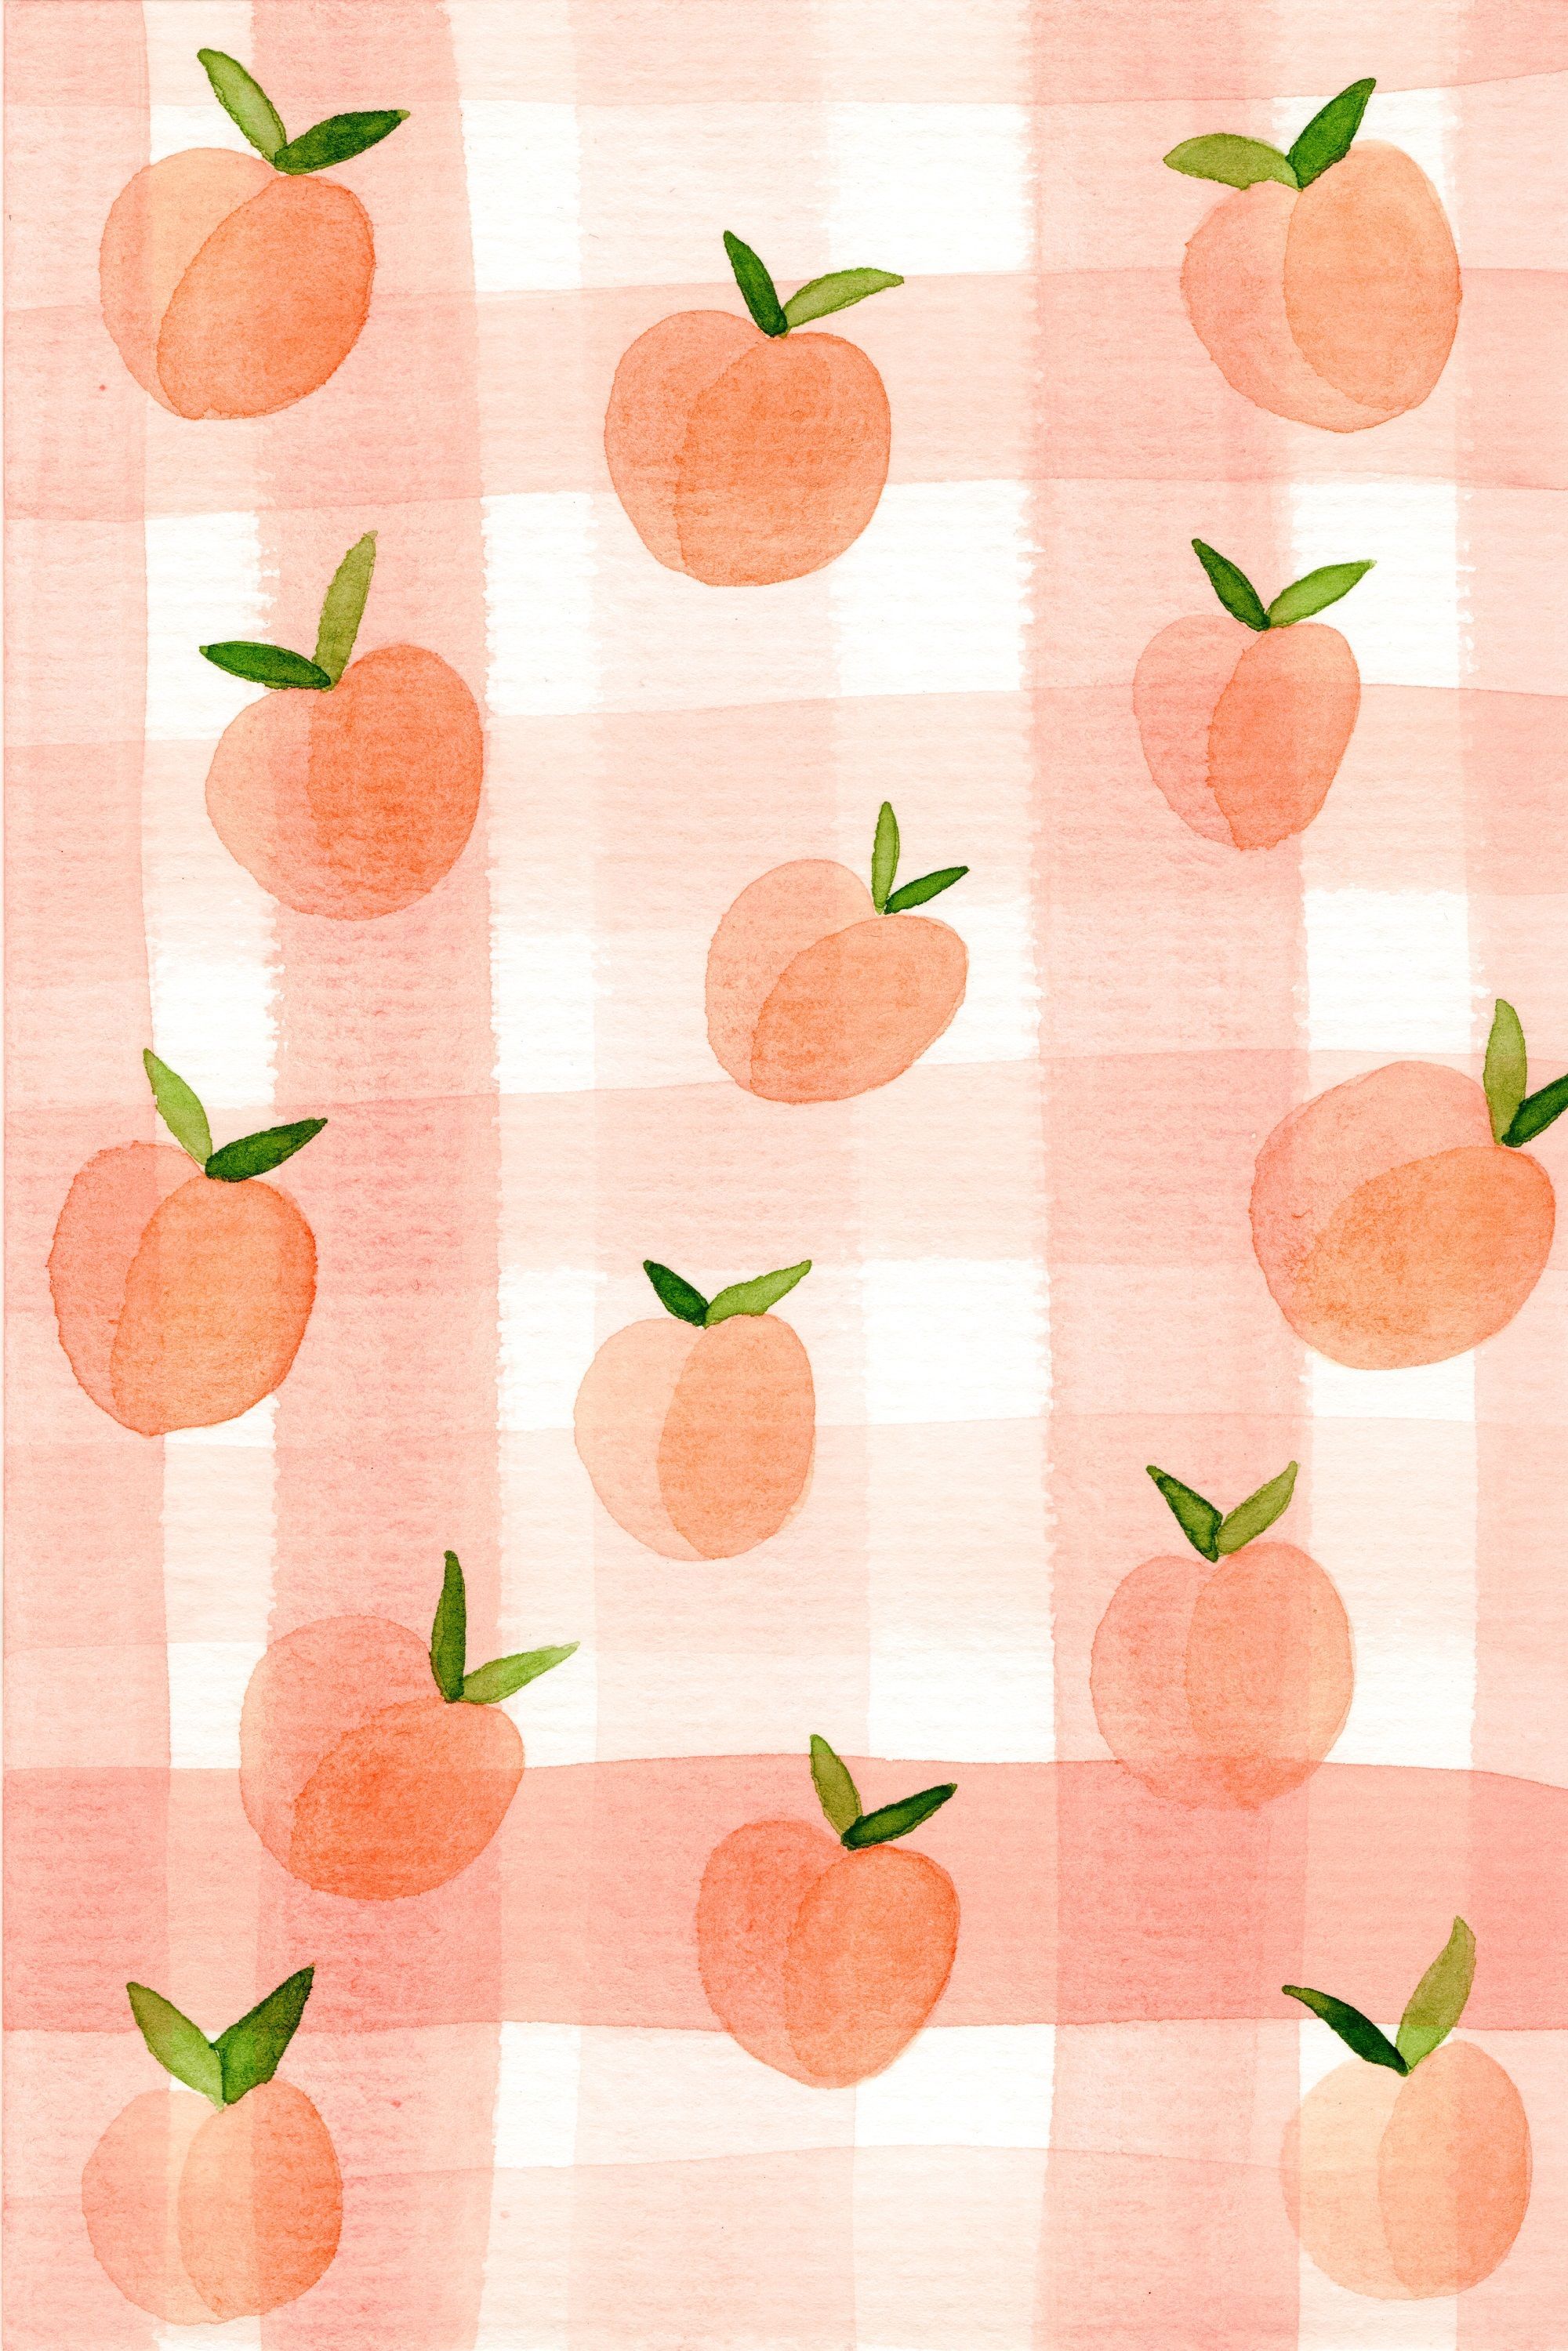 Inspirational iPhone  Peach Abstract iphone Cute for phone HD phone  wallpaper  Peakpx